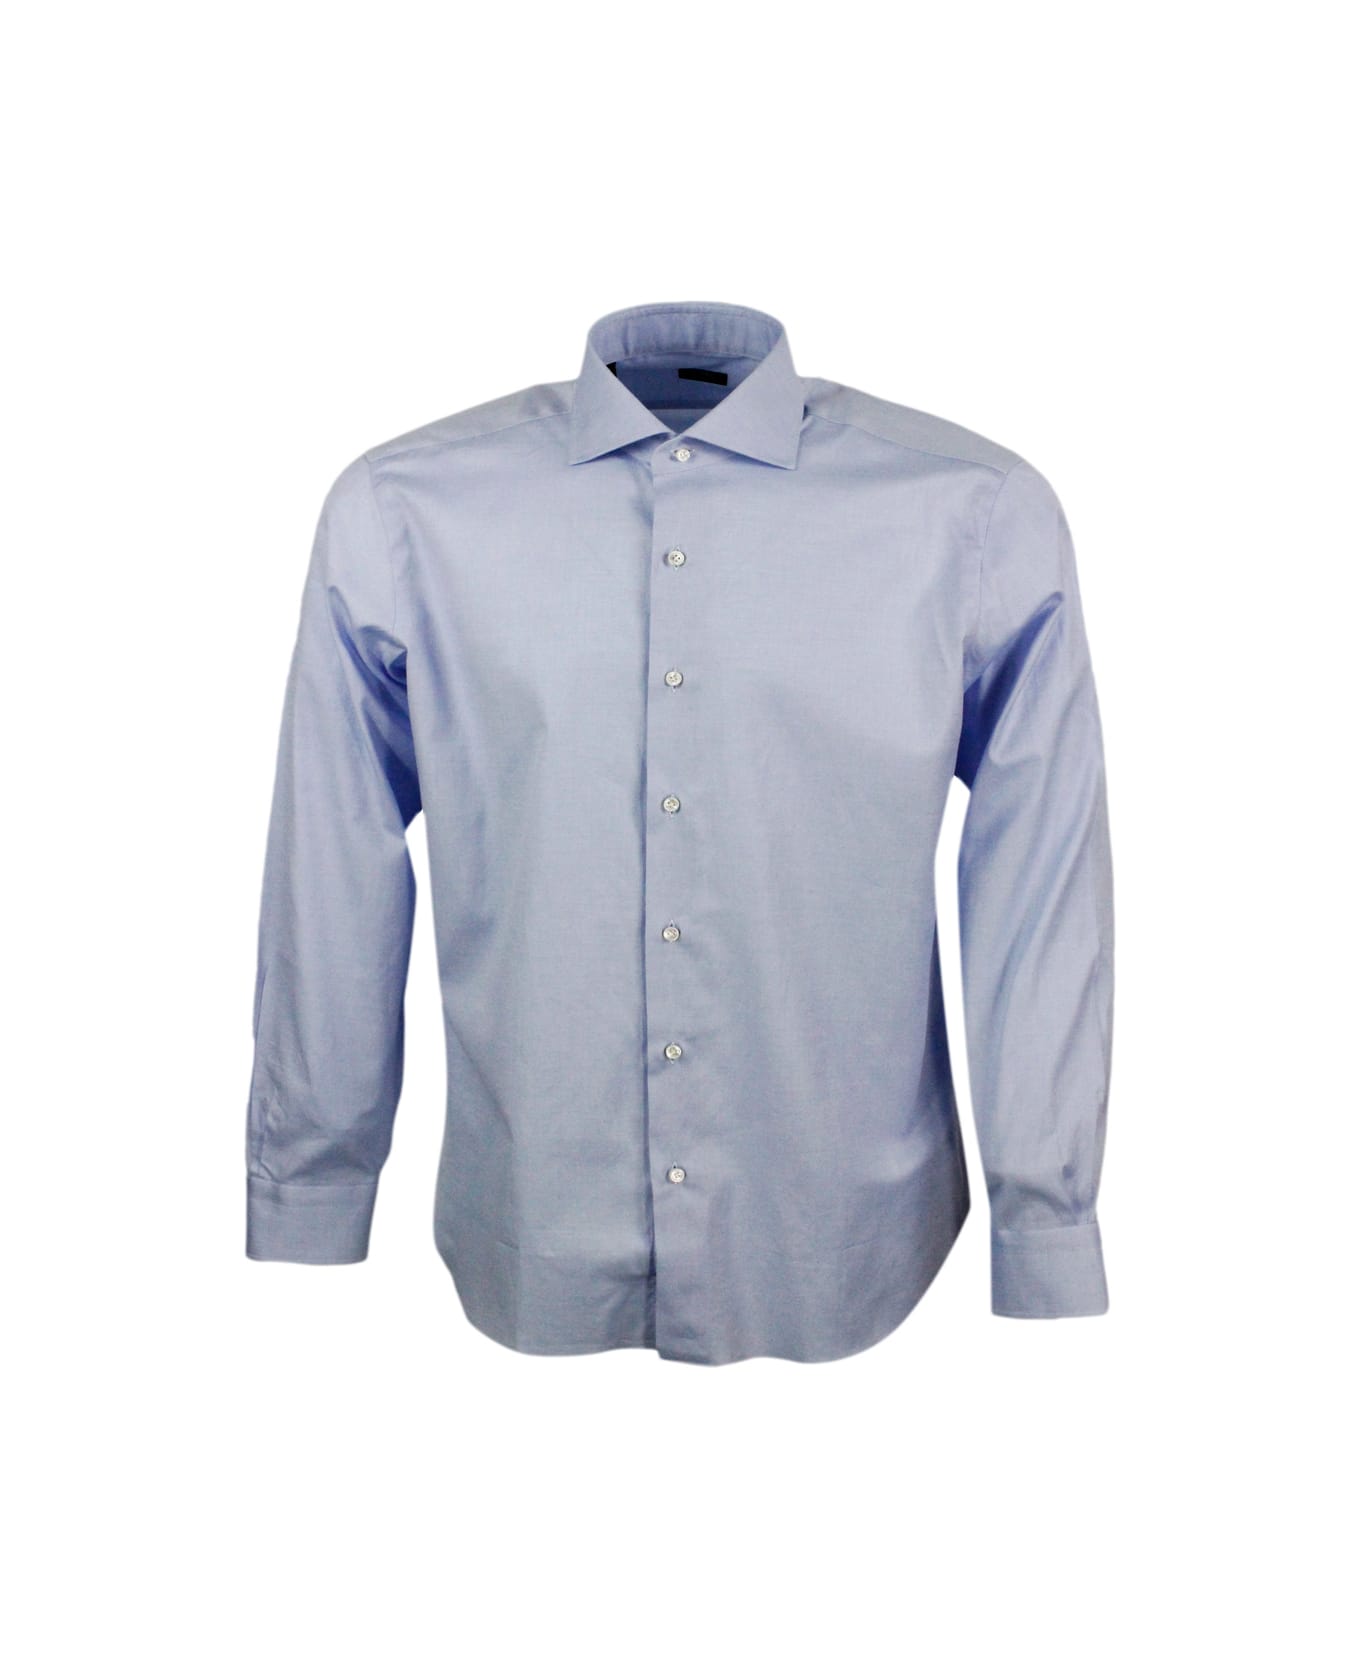 Barba Napoli Slim Fit Shirt In Fine Stretch Honeycomb Cotton, Italian Collar, Hand-sewn Black Label And Mother-of-pearl Buttons - Light Blu